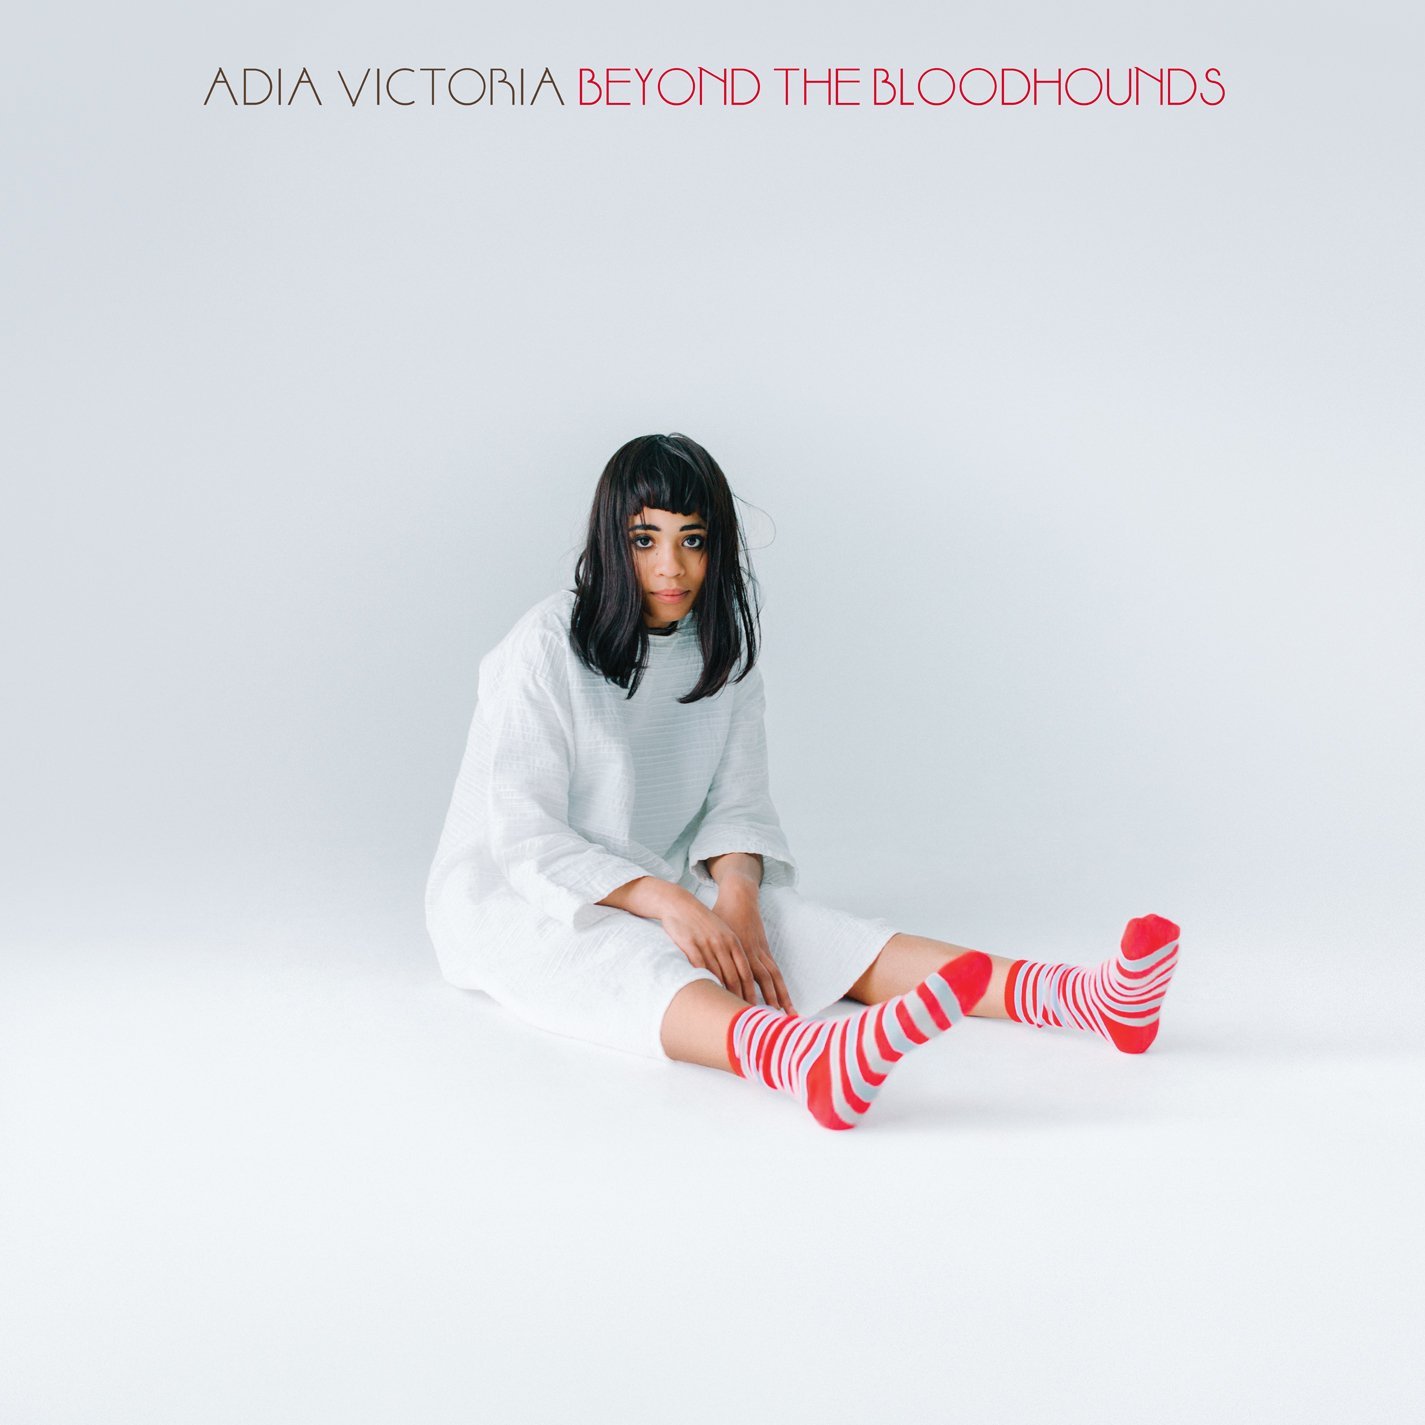 Adia Victoria - Beyond The Bloodhounds (2016) [HDTracks FLAC 24bit/44,1kHz]